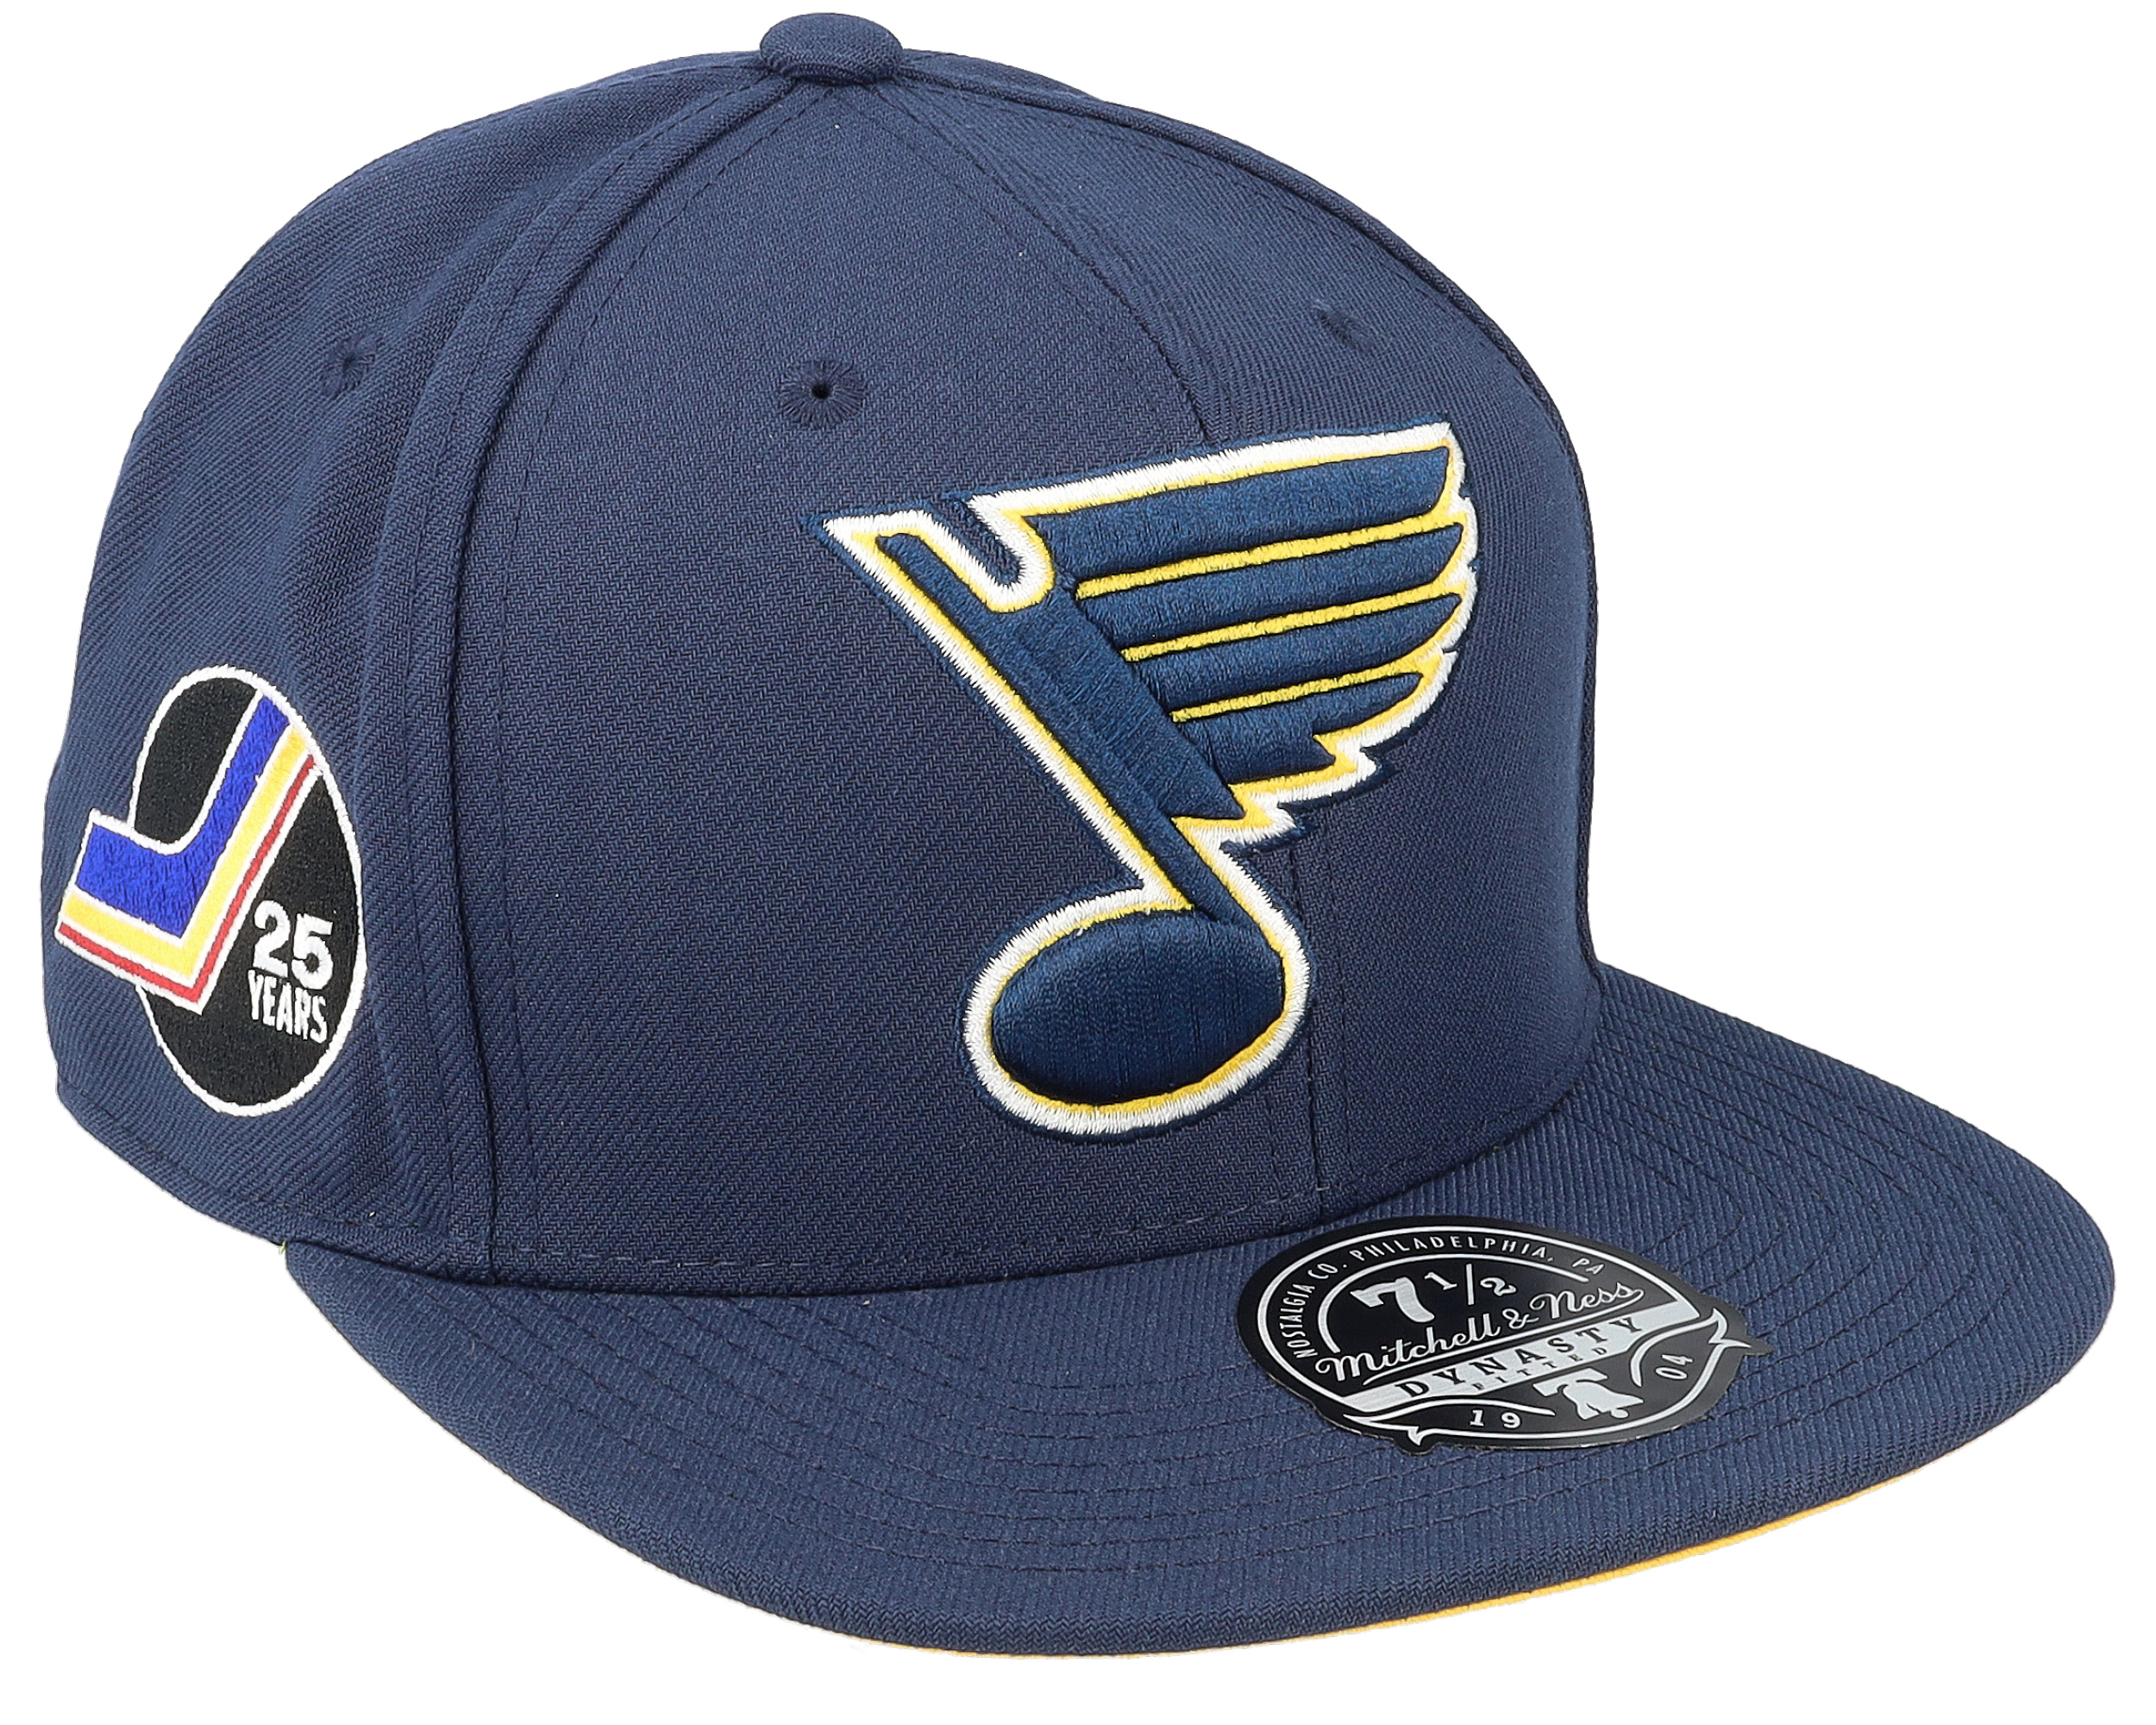 Mitchell & Ness Men's St. Louis Blues Vintage Fitted Hat